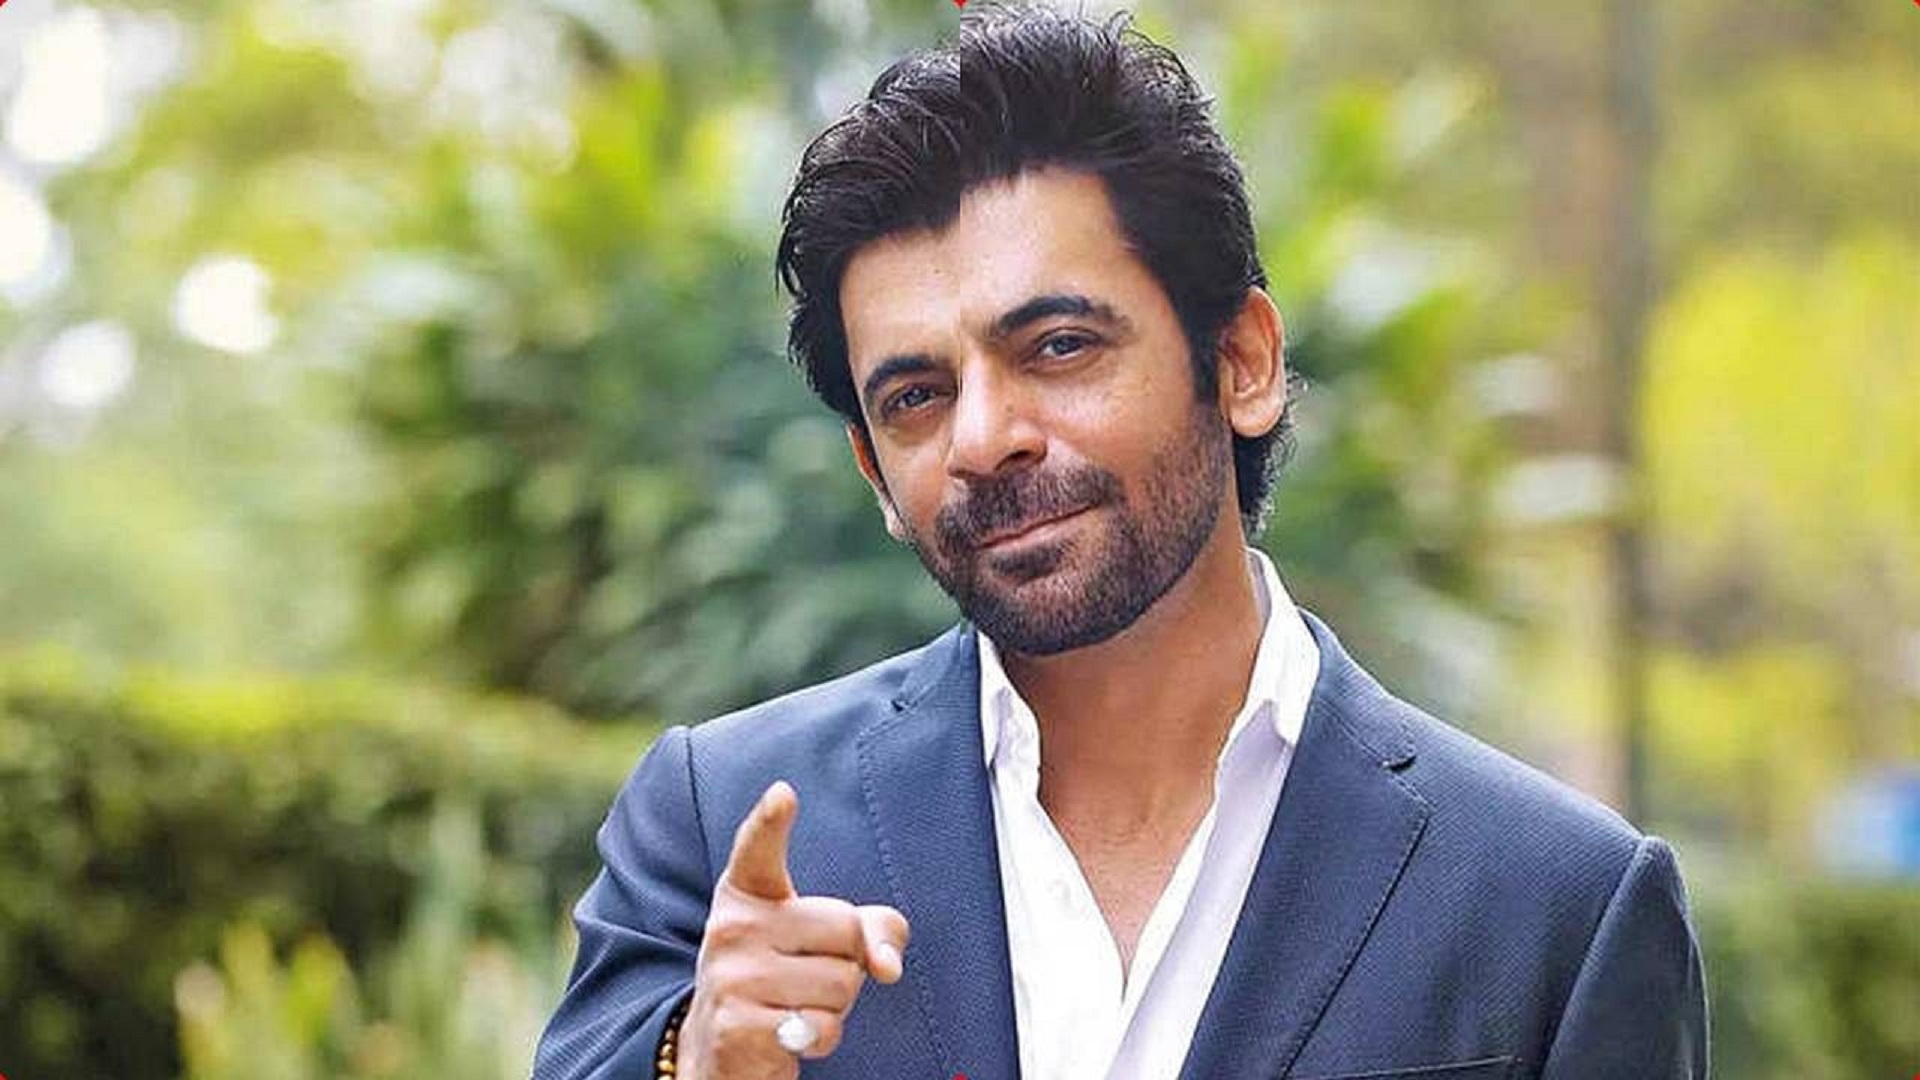 Comedian Sunil Grover Undergoes Heart-Related Surgery, After Being Diagnosed With Blockage